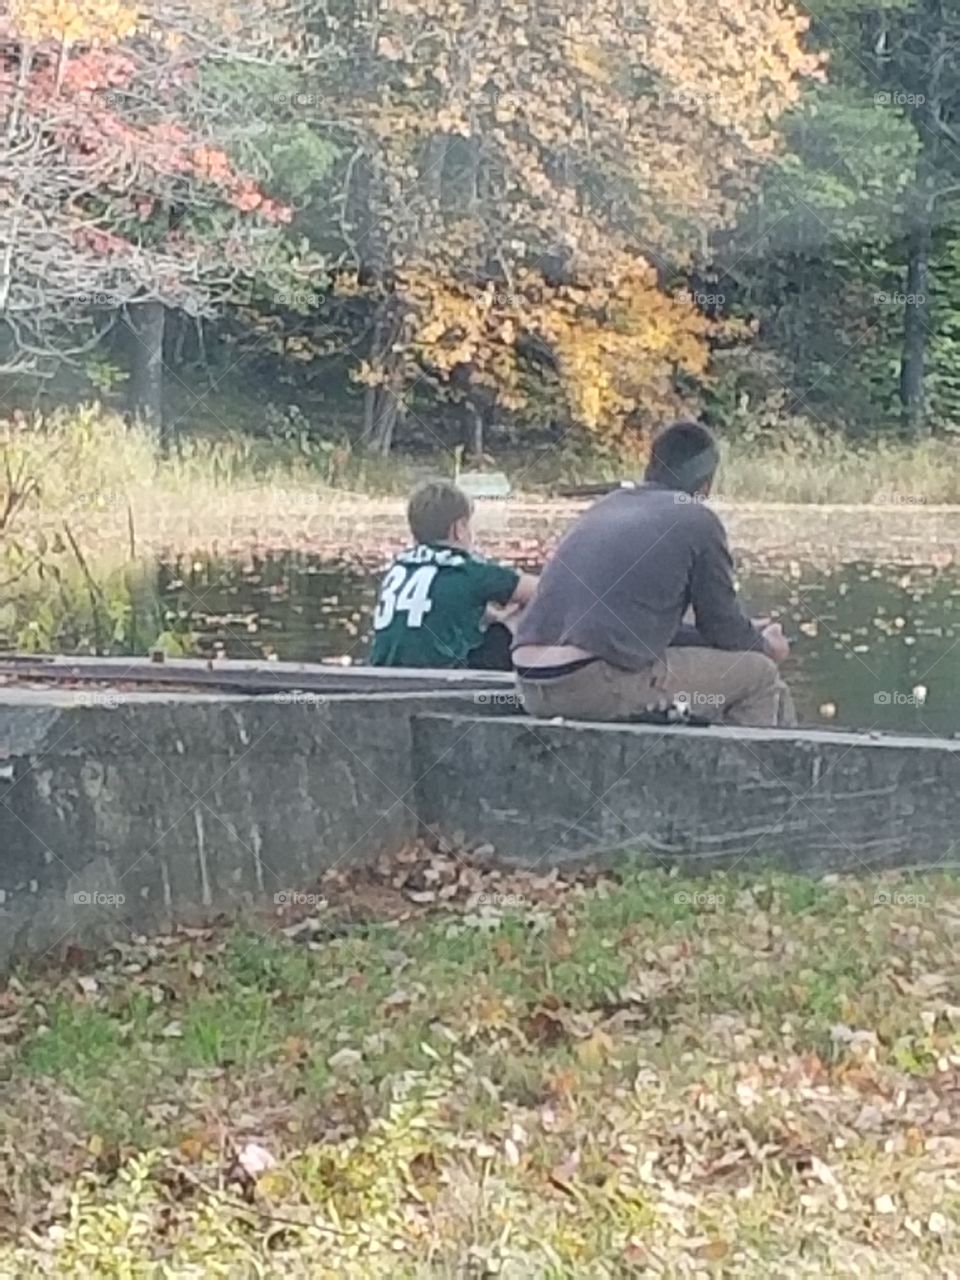 Dad and son fishing